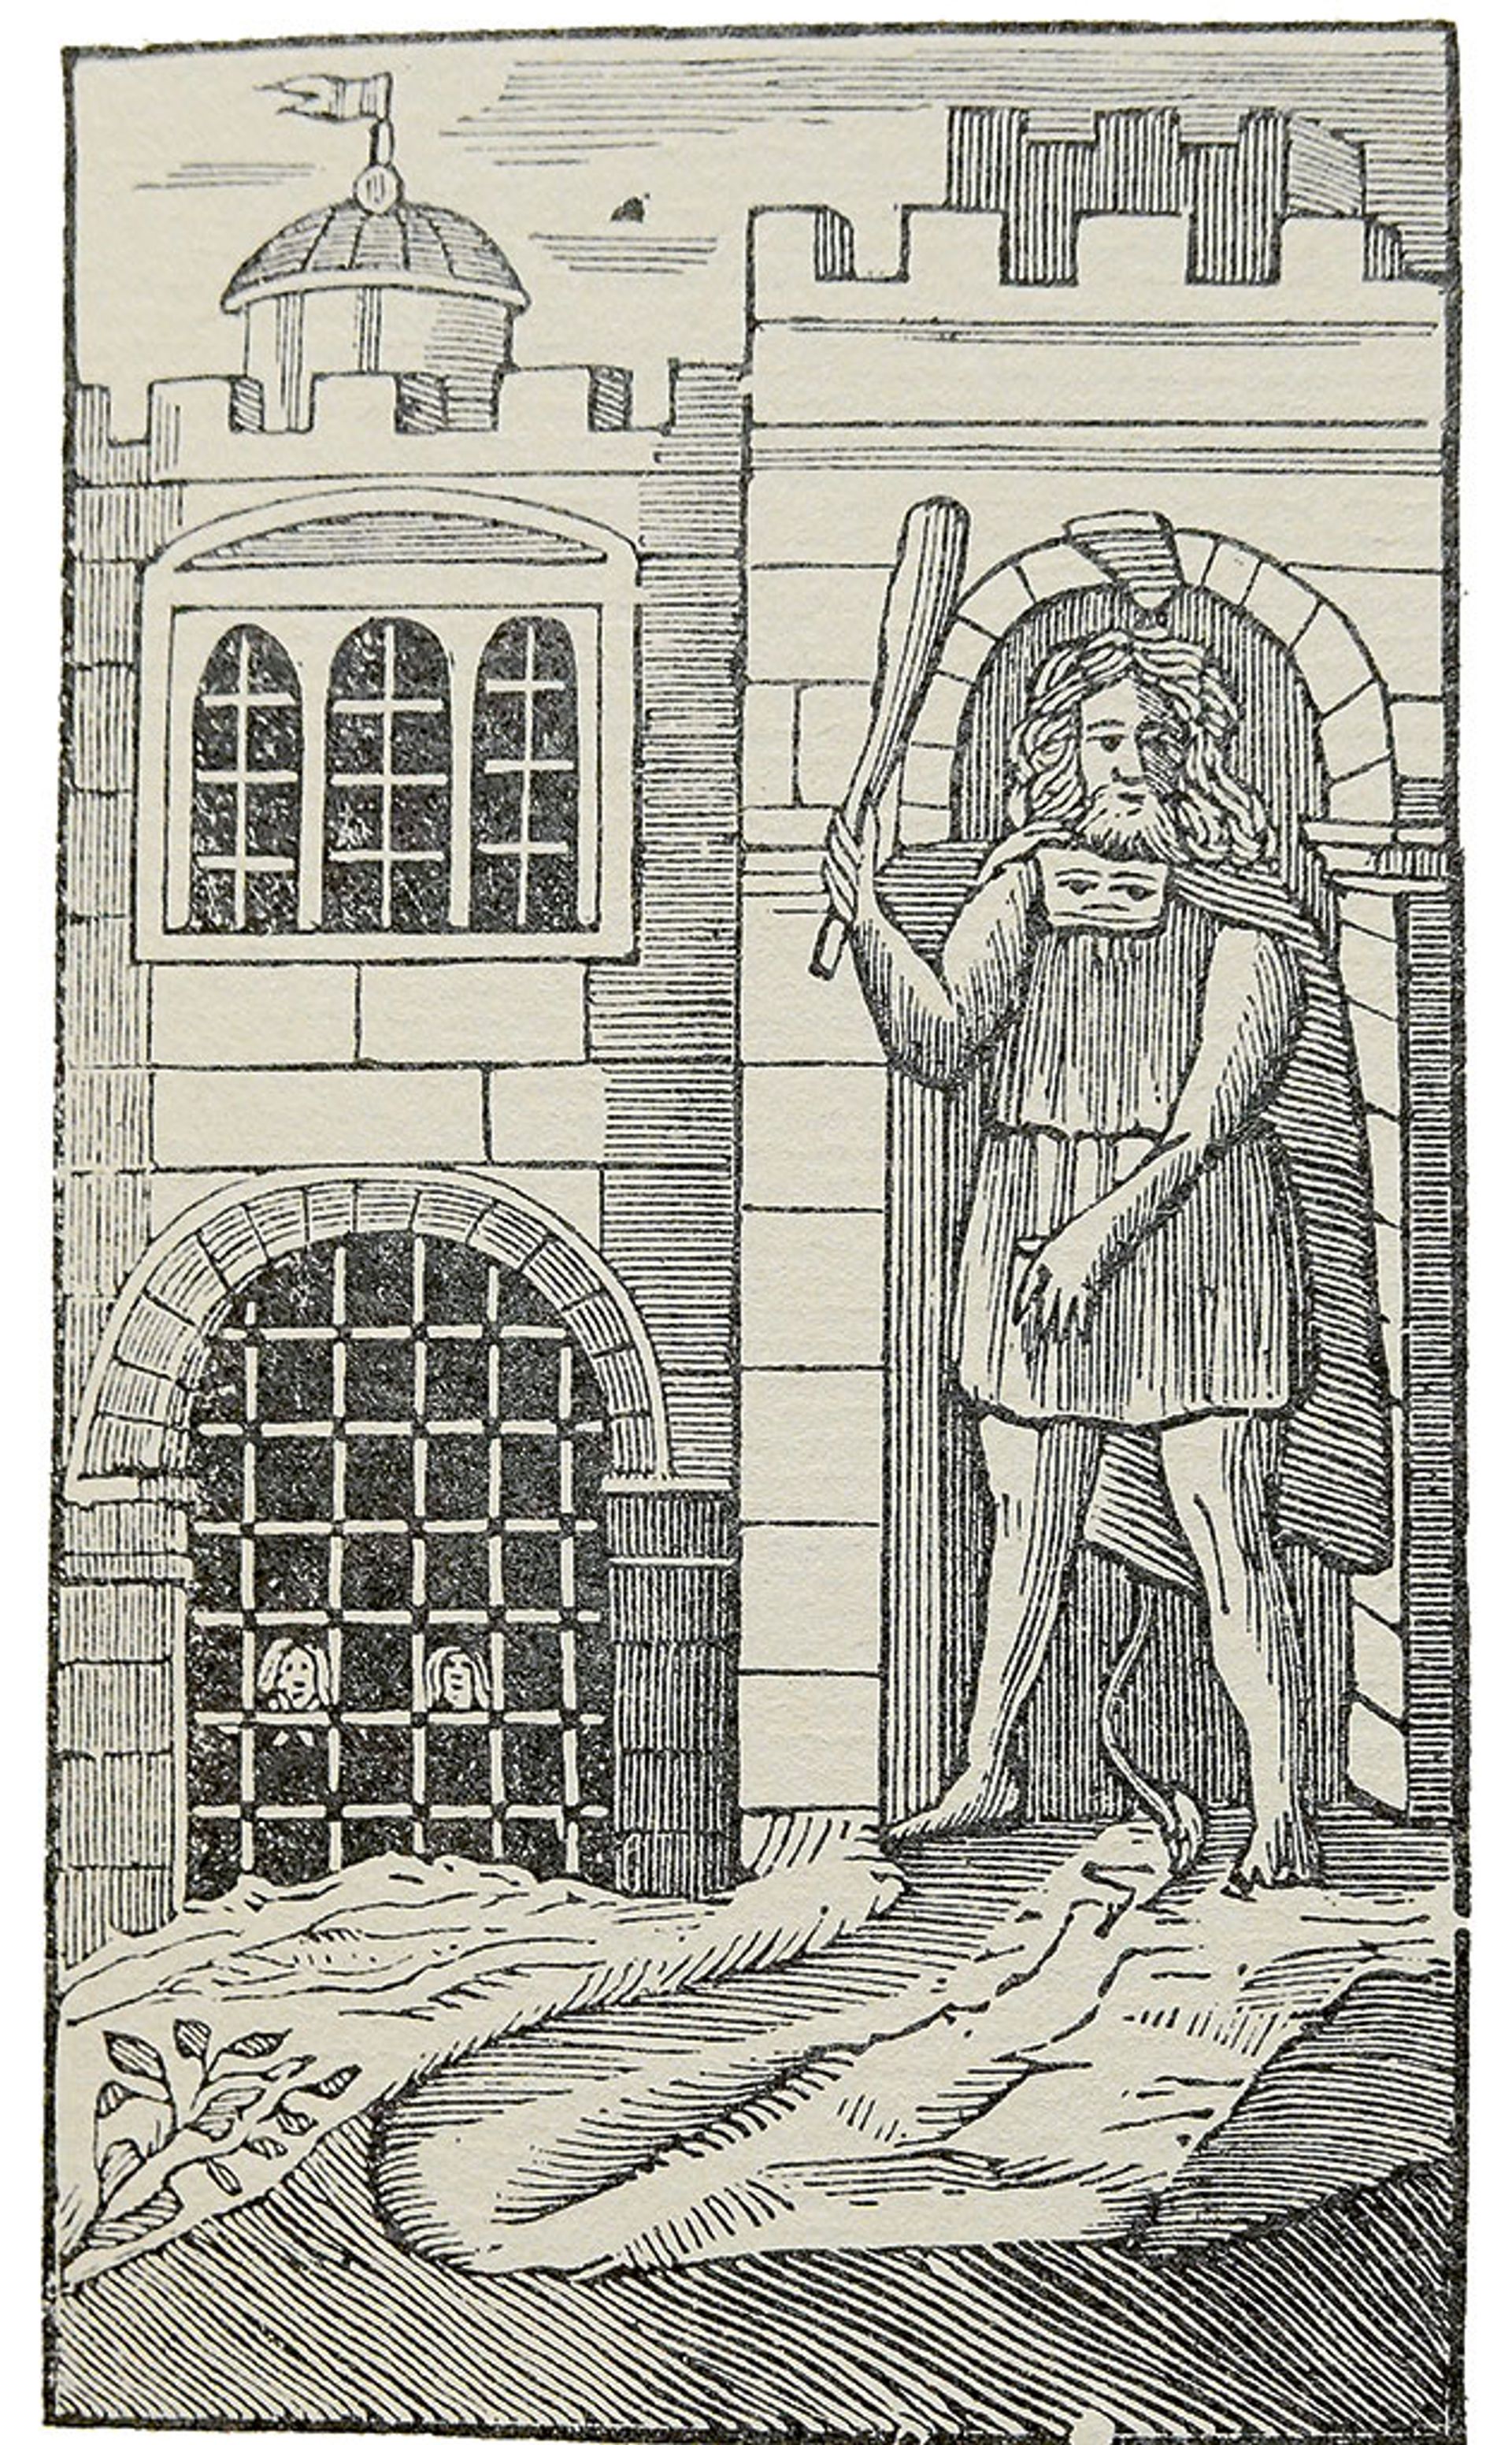 Illustration from the first edition of John Bunyan’s nonconformist allegory, A Pilgrim’s Progress (1678), depicting Giant Despair guarding the fictional Doubting Castle Courtesy of the author